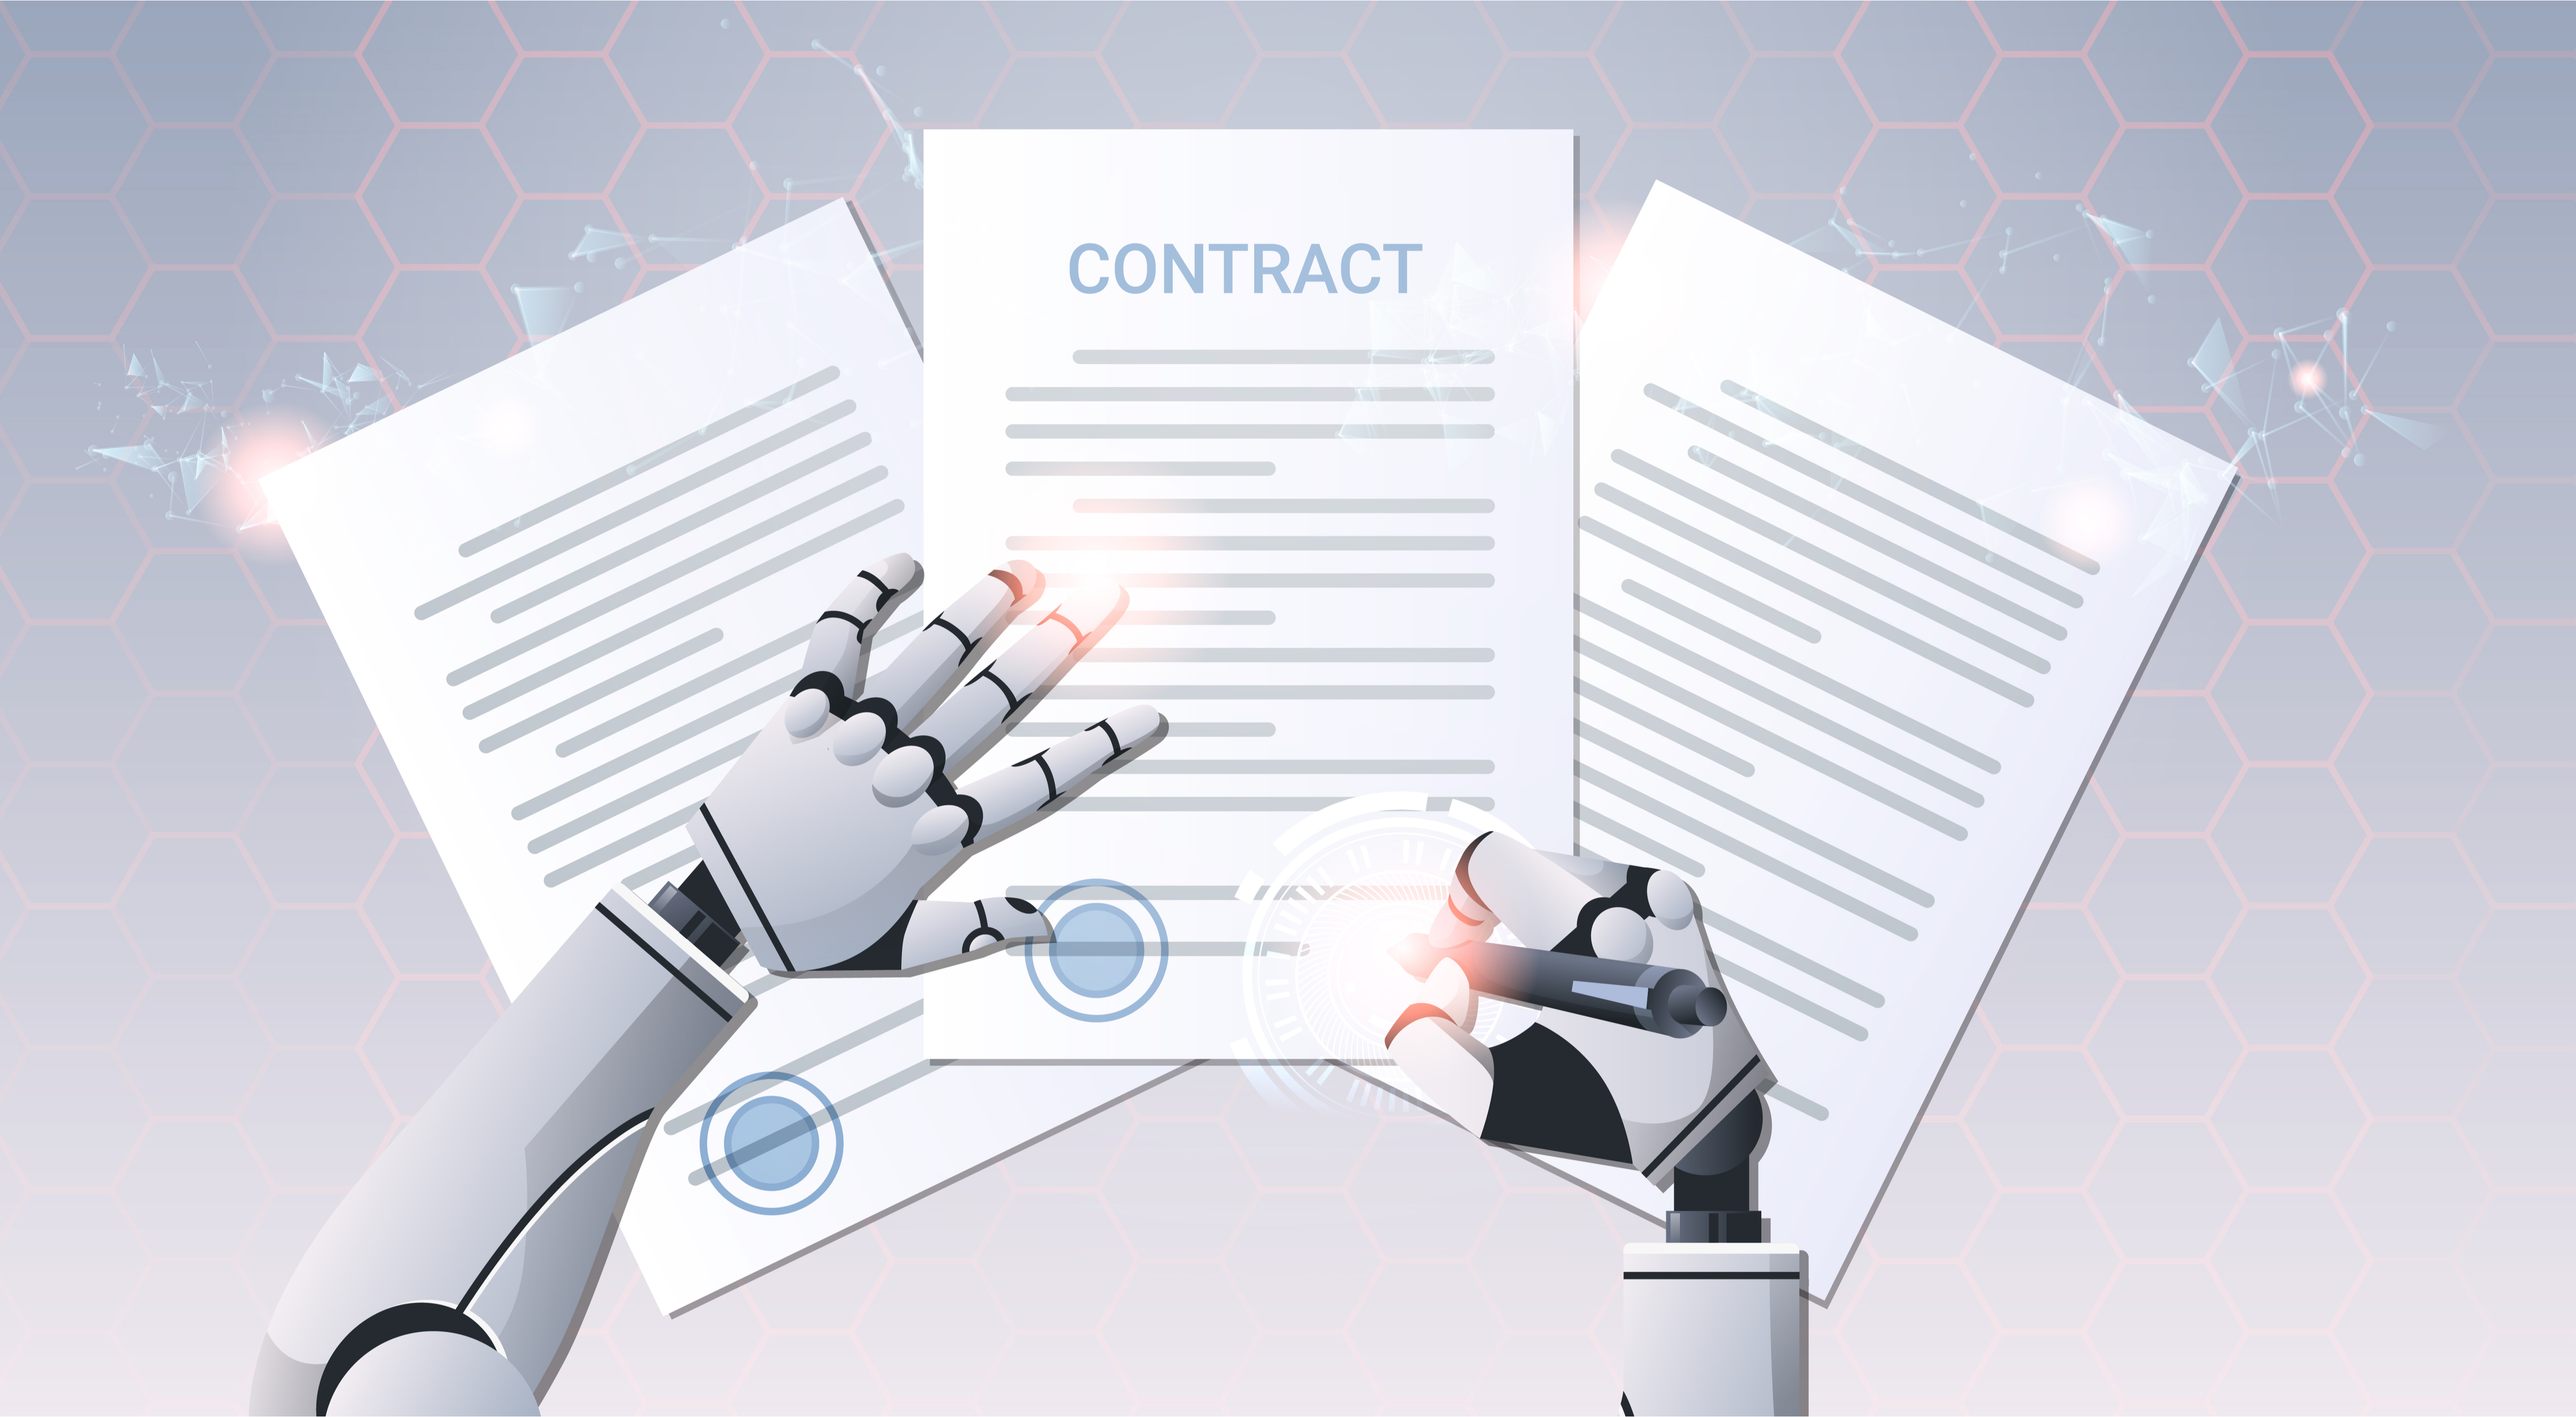  Robot signing contract to represent legal tech innovation in artificial intelligence